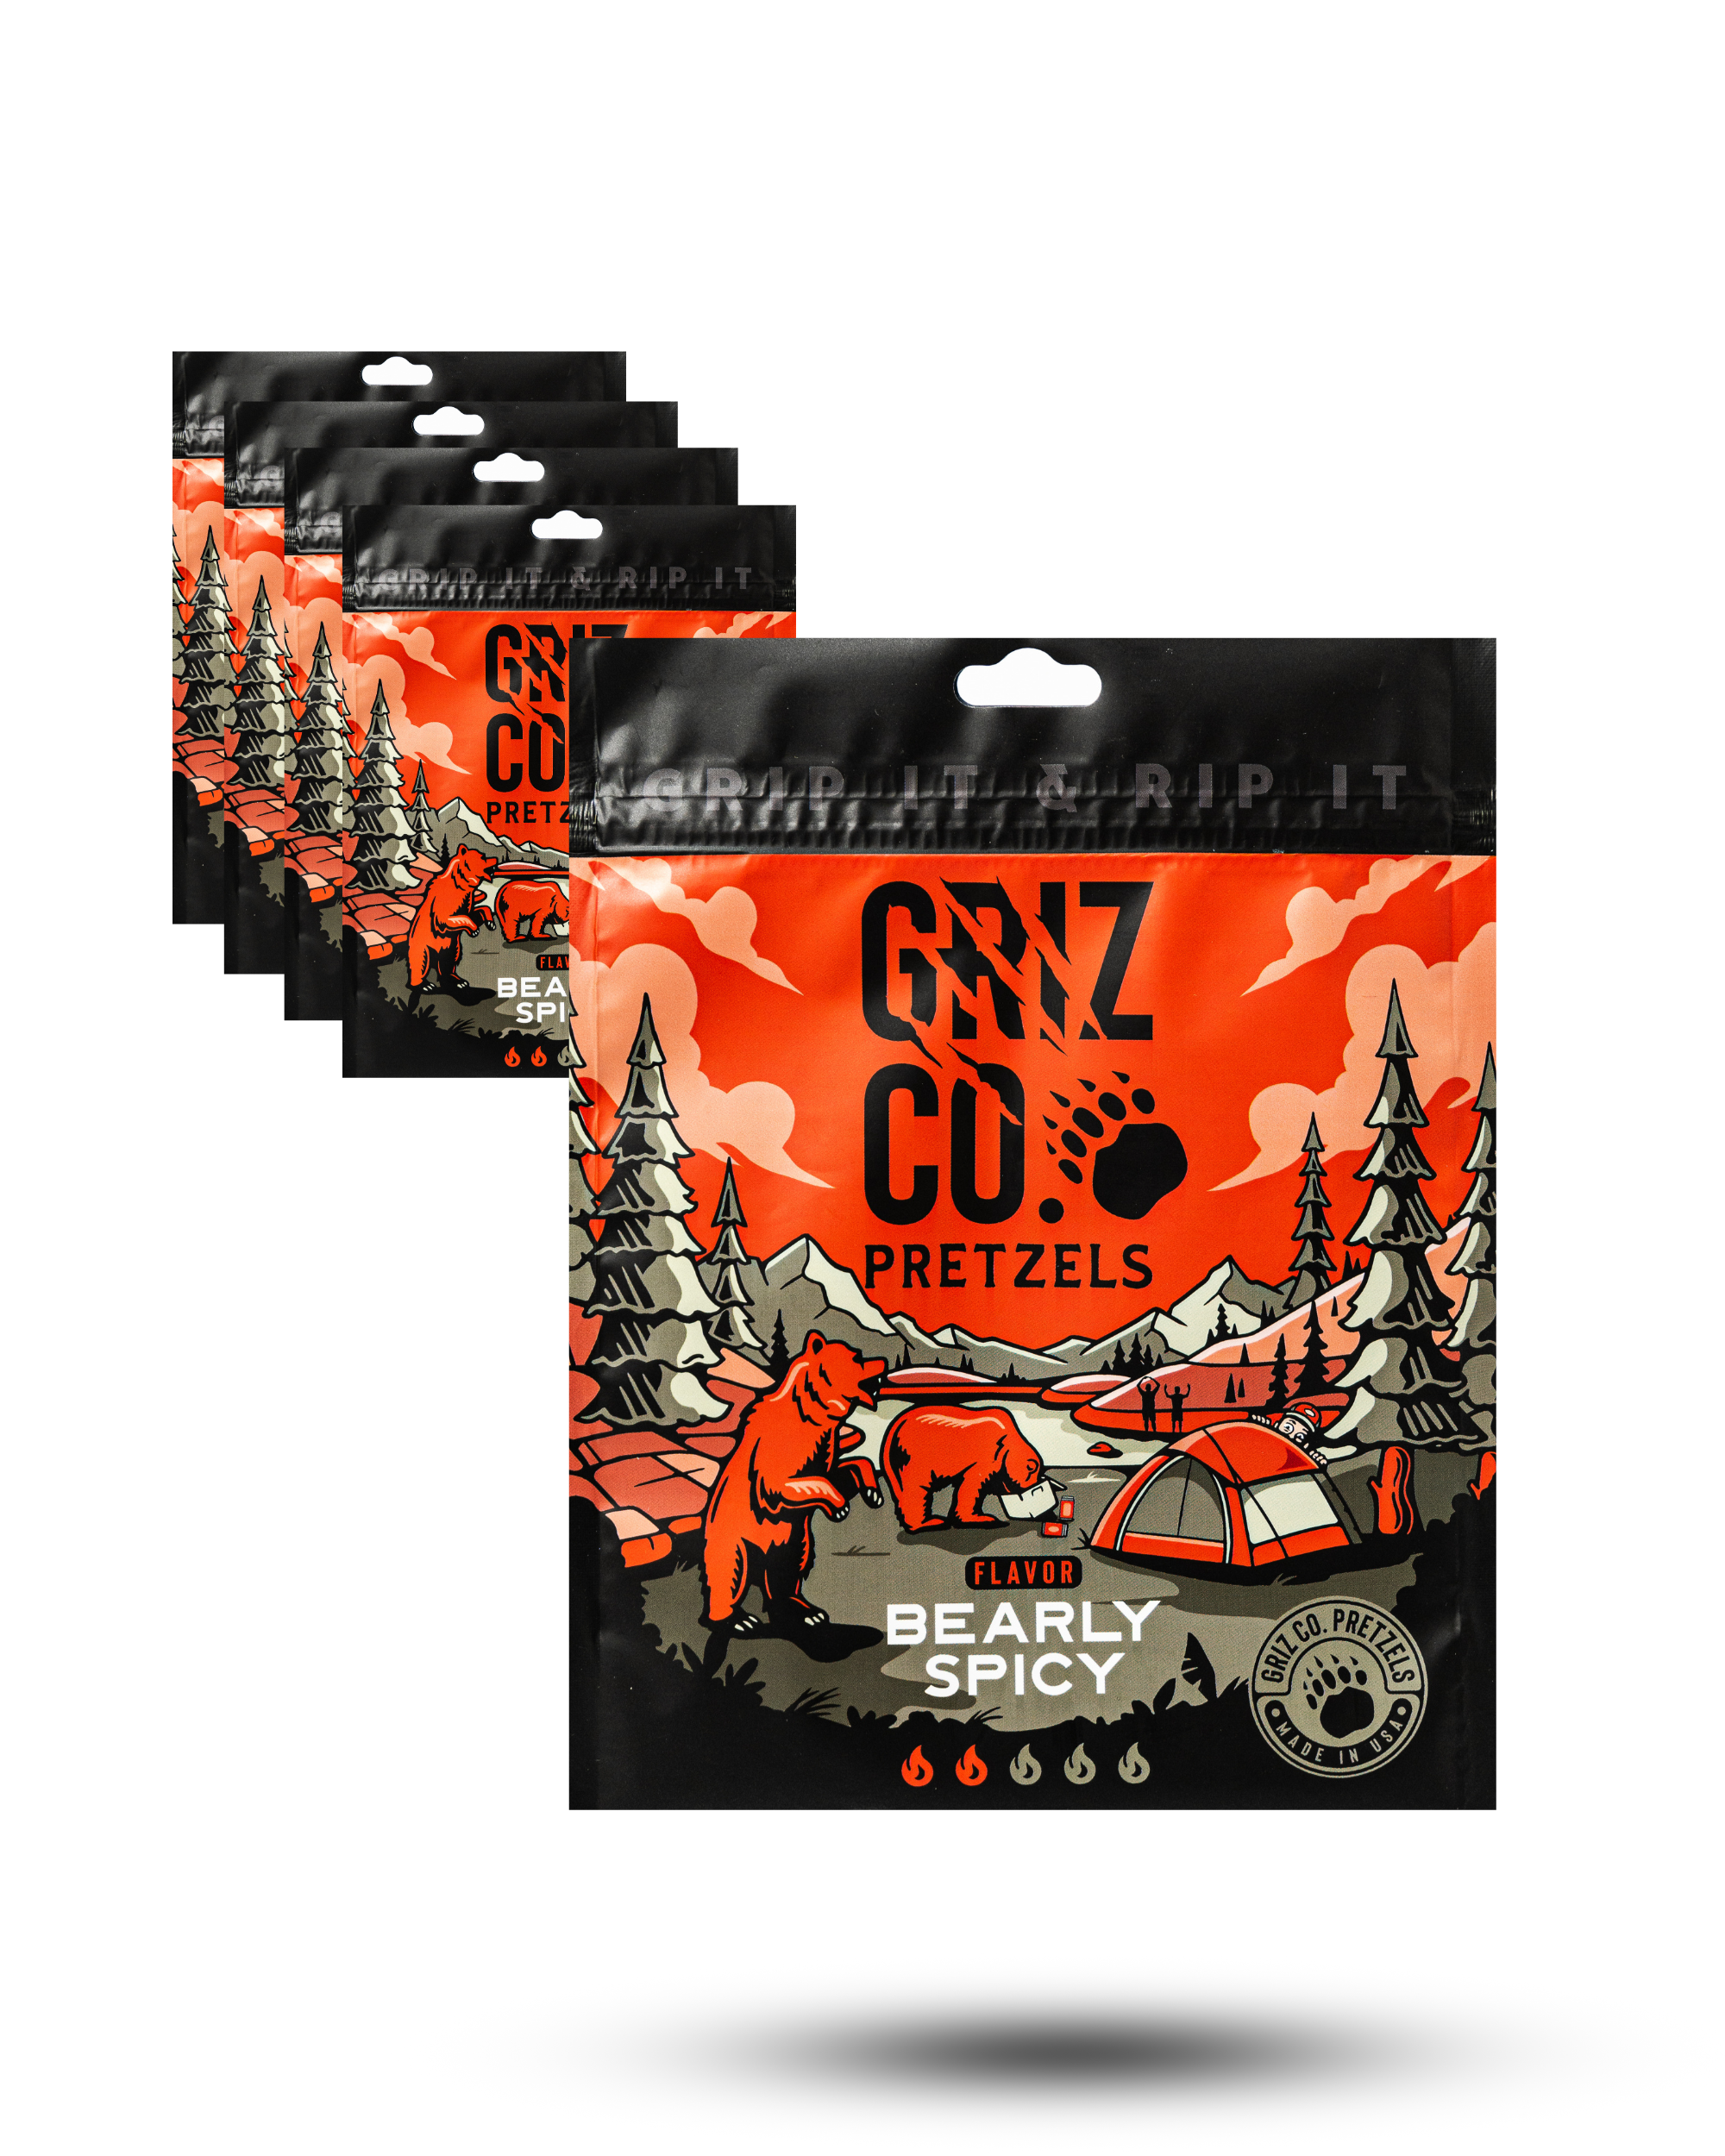 Griz Co. Pretzels Bearly Spicy 5 PACK